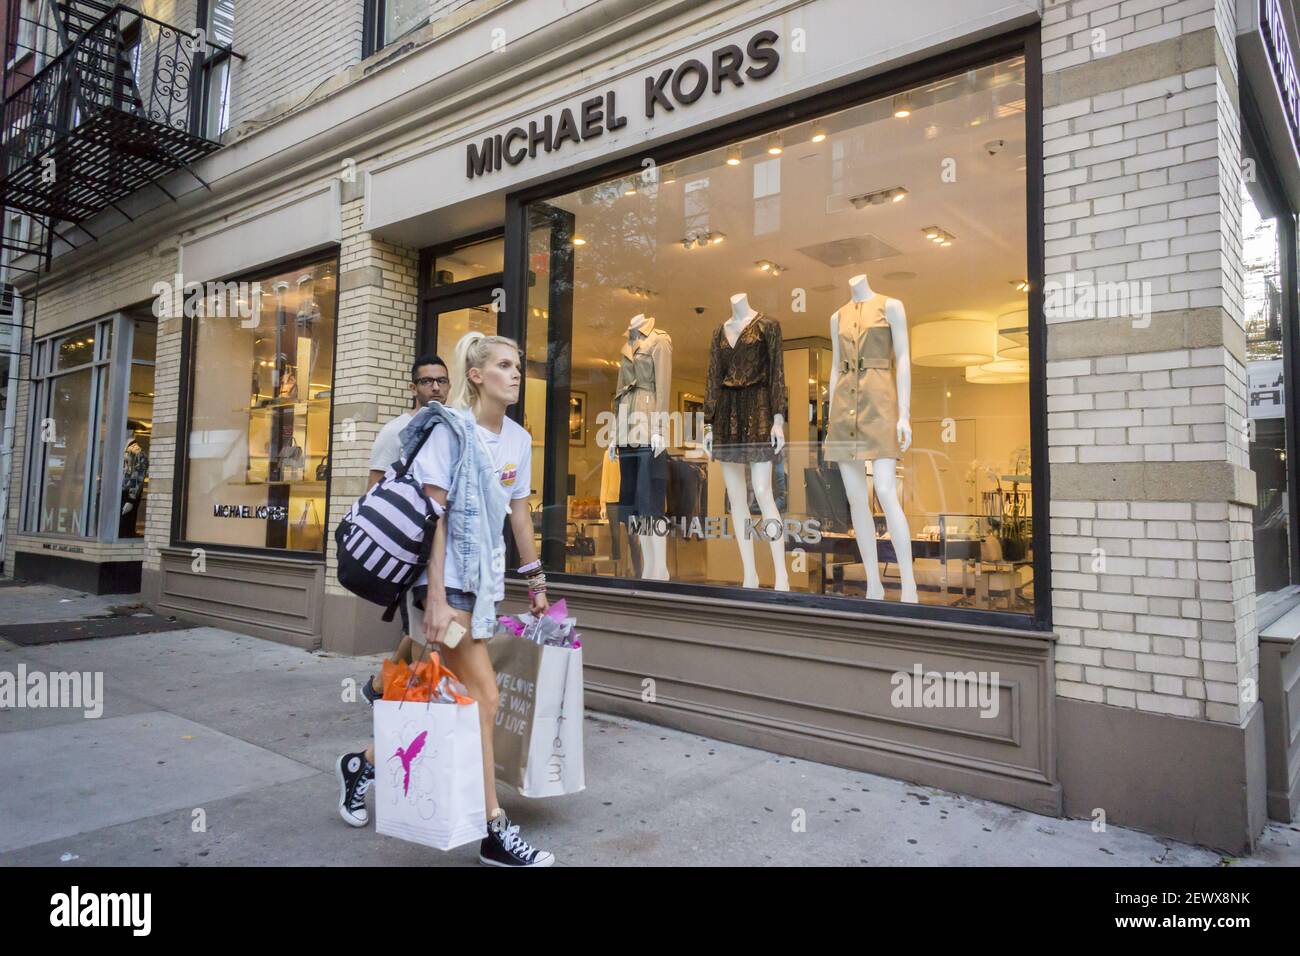 A Michael Kors store in New York on trendy Bleecker Street on Tuesday,  August 4, 2015. Michael Kors is scheduled to report fiscal third-quarter  earnings and revenue prior to the bell on